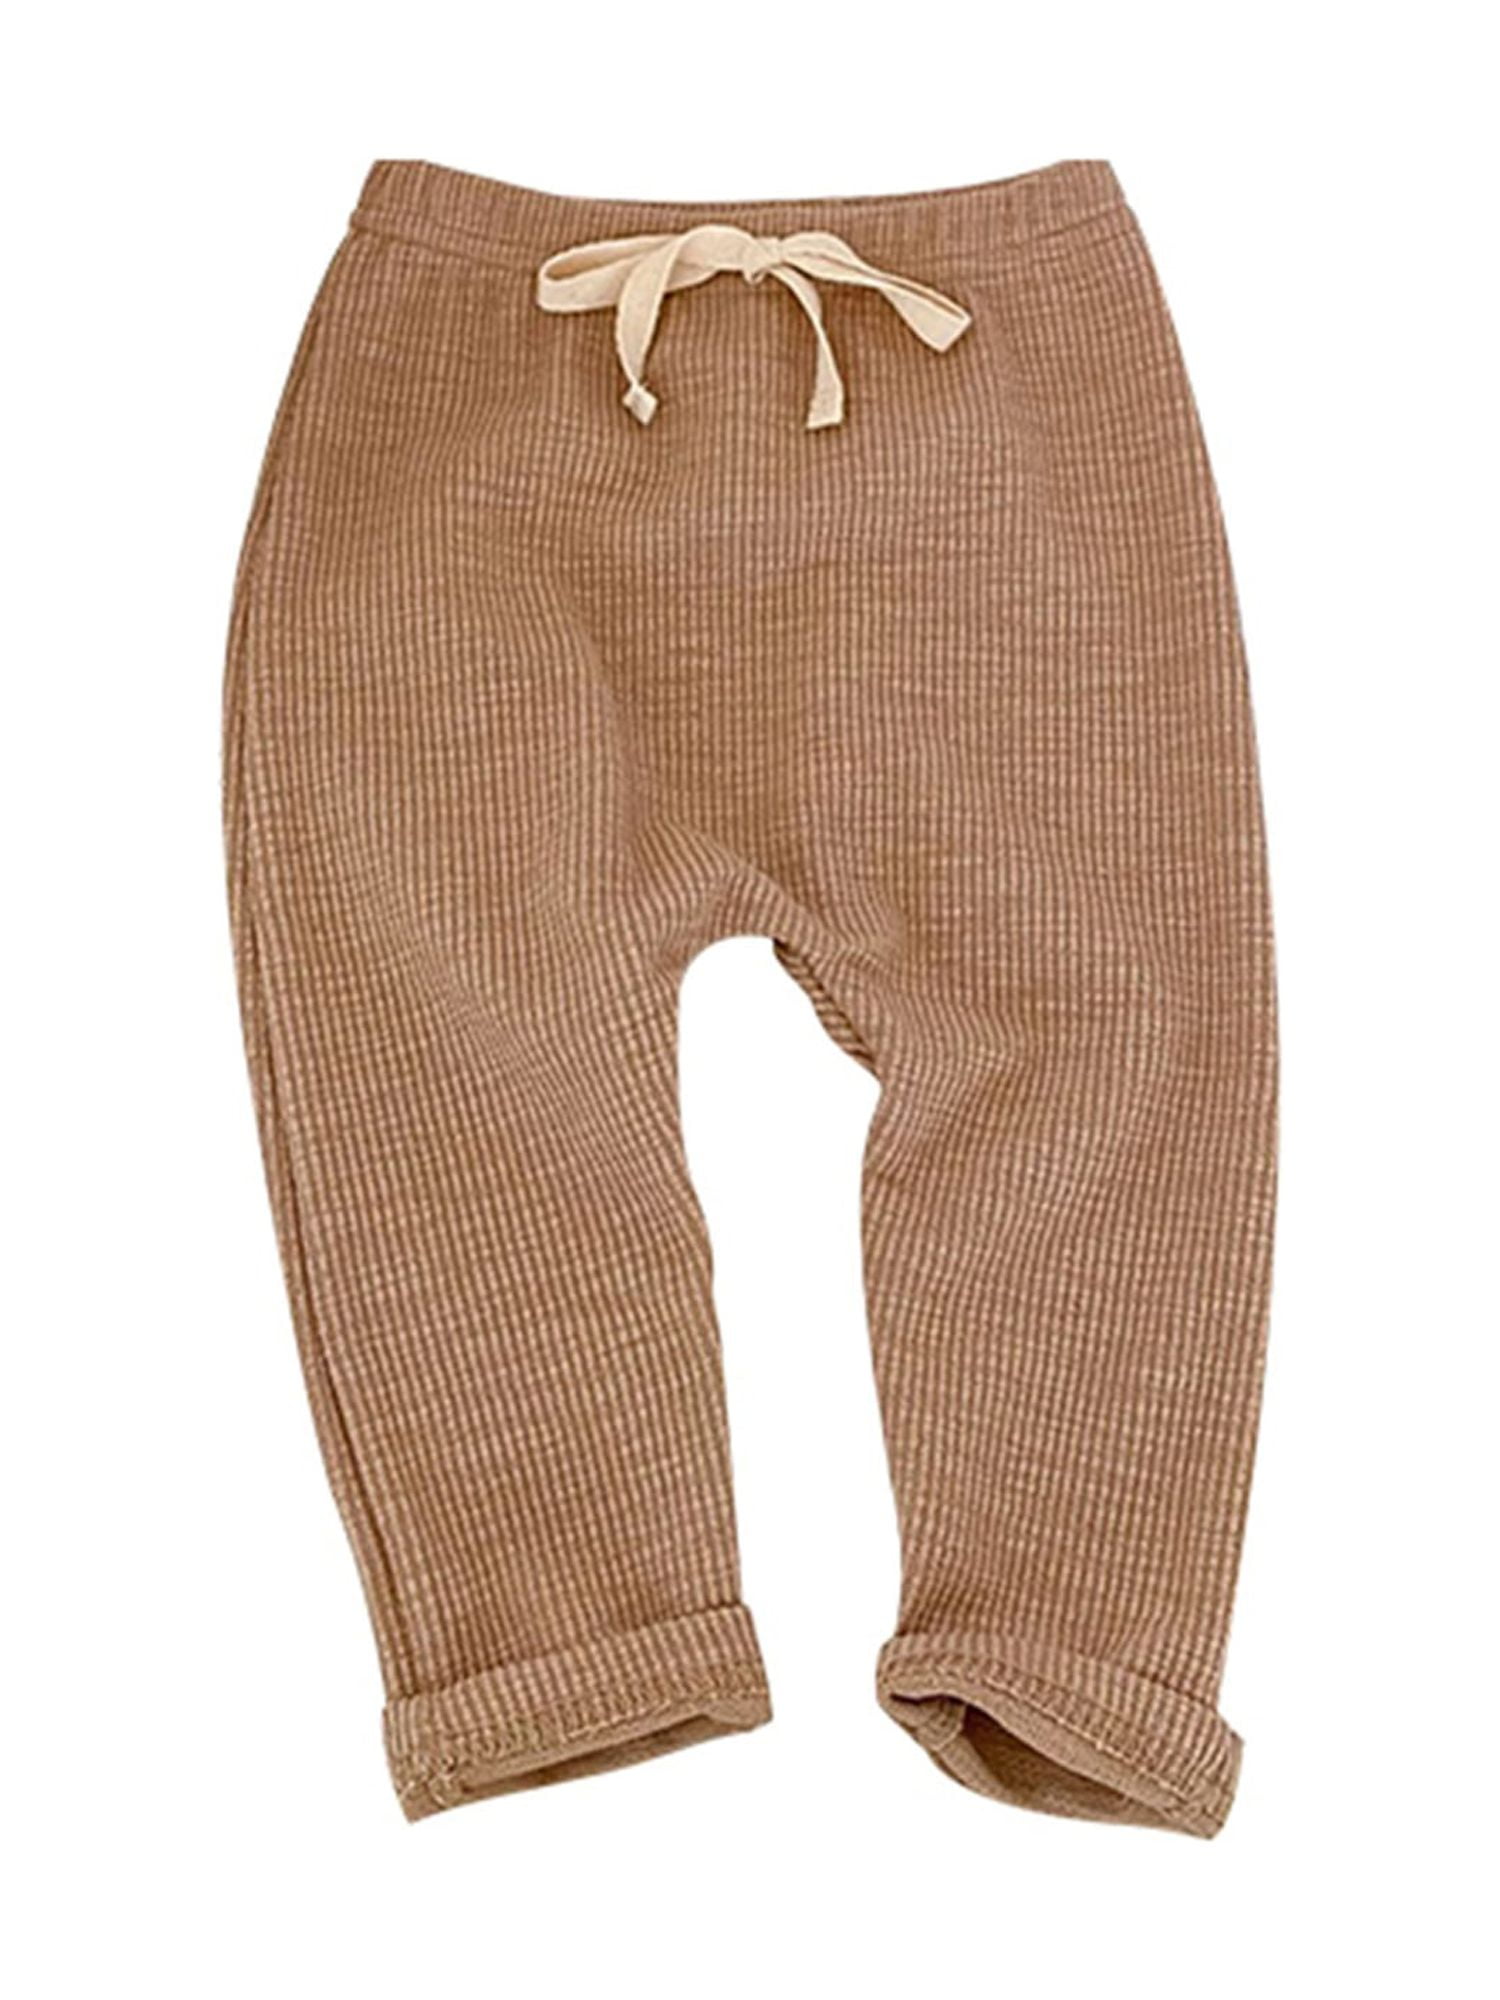 Video) Sew-a-long: Adorable FREE Ribbed Leggings from Lowland Kids...